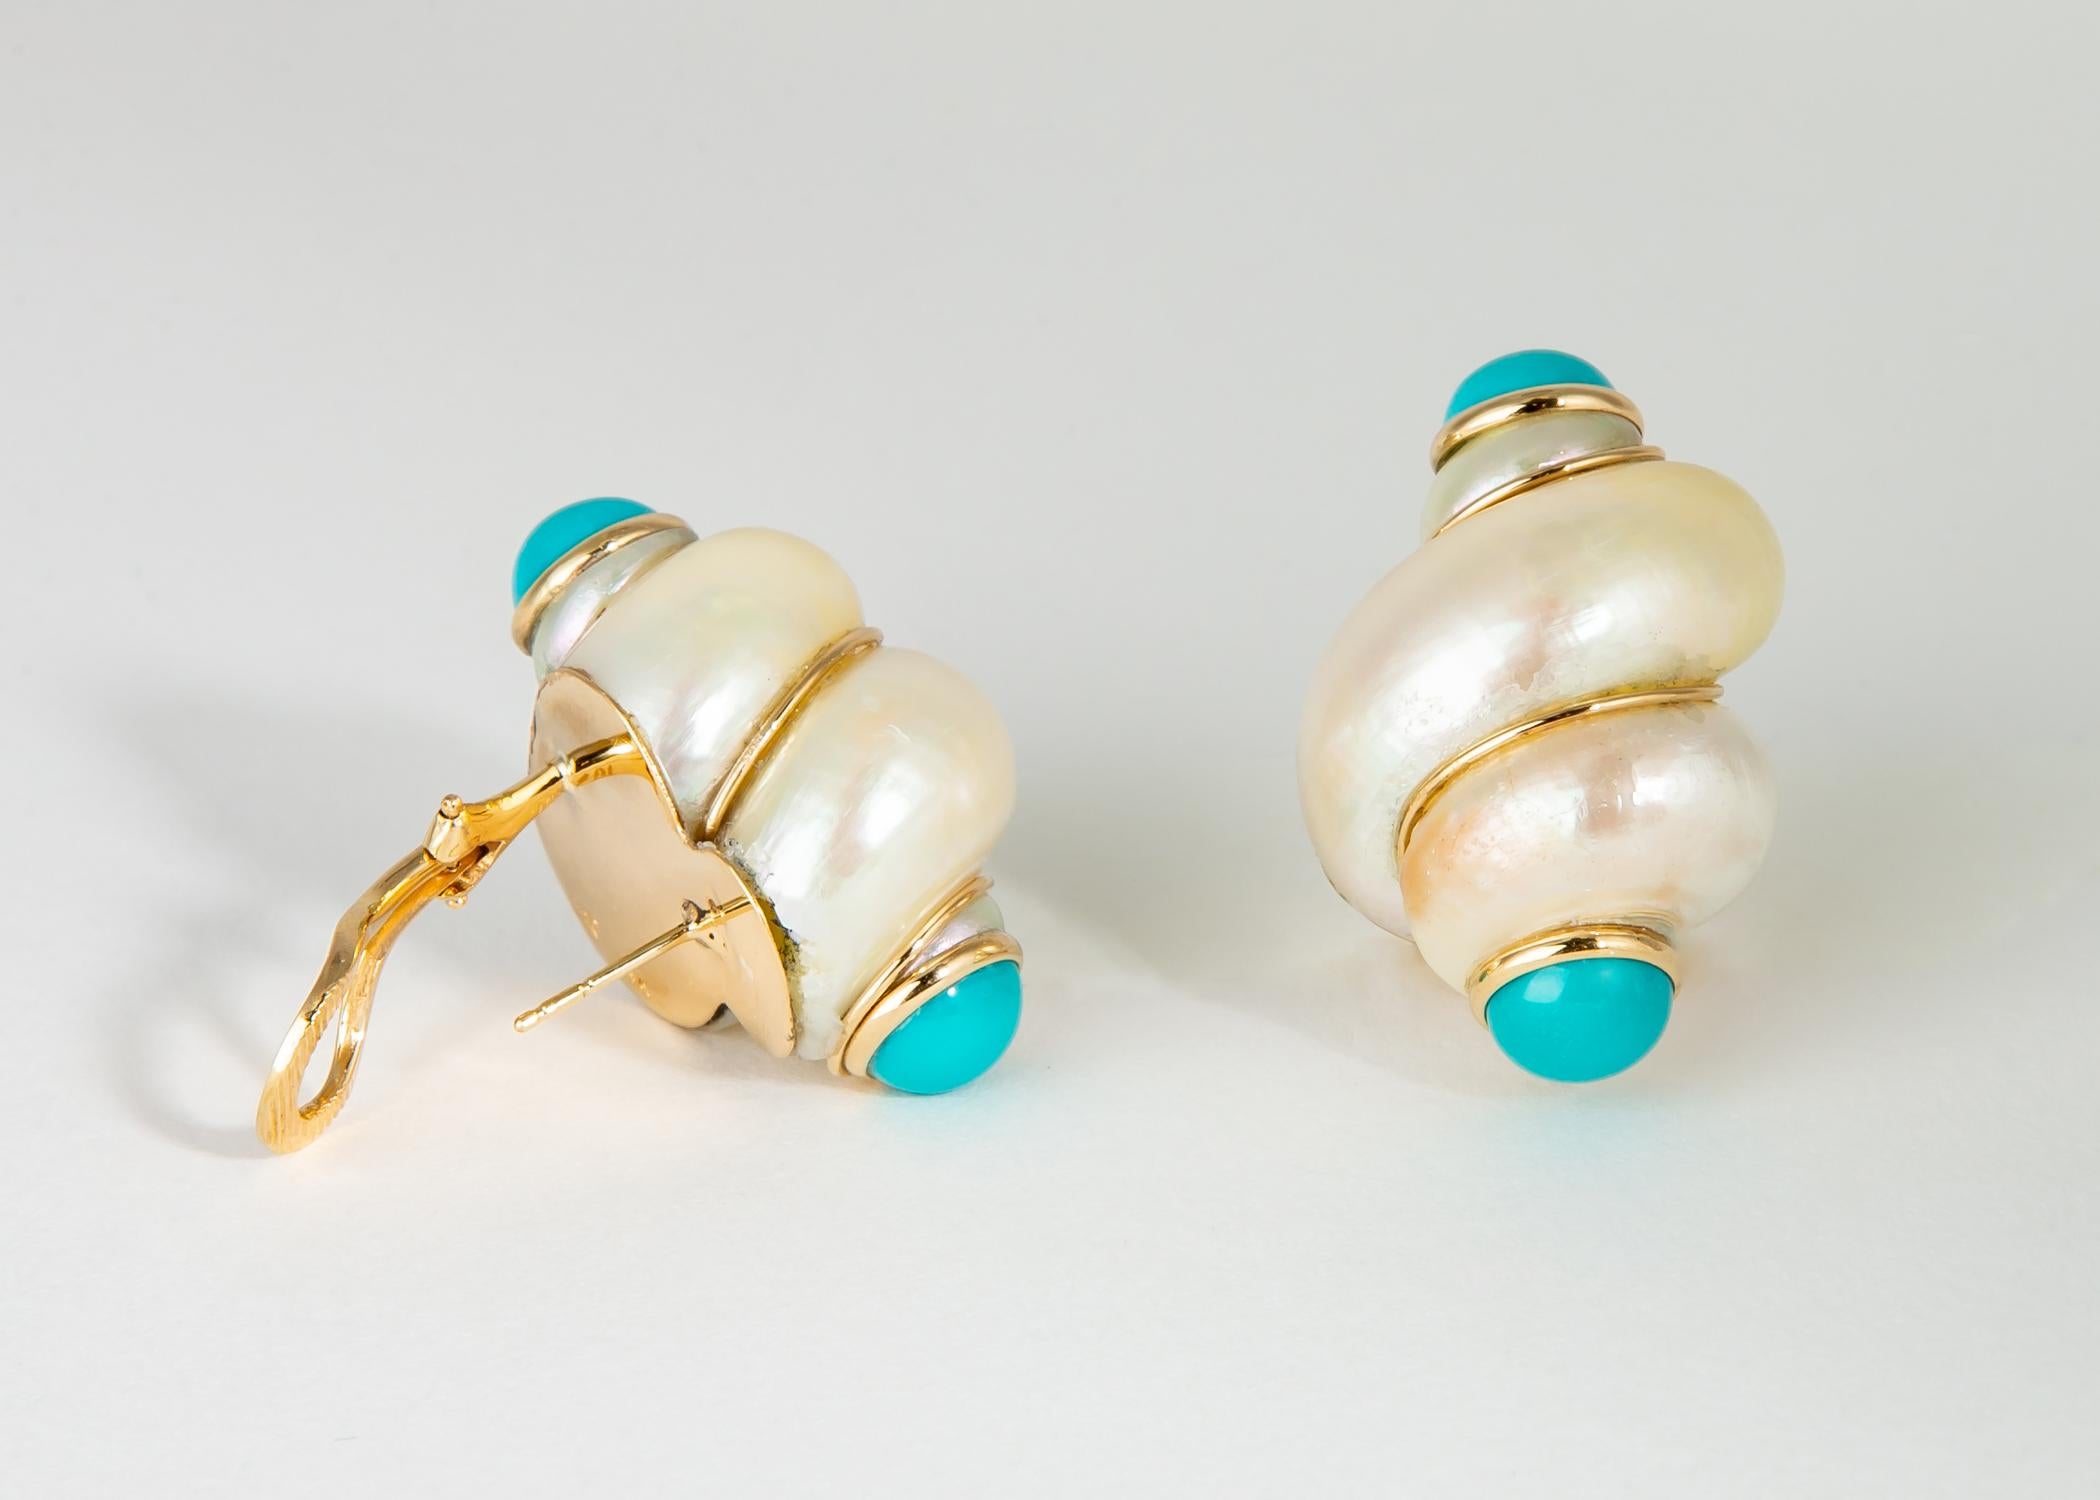 In the tradition of Seaman Schepps and Trianon Maz uses a natural shell adds turquoise accents to create this chic wearable earring.